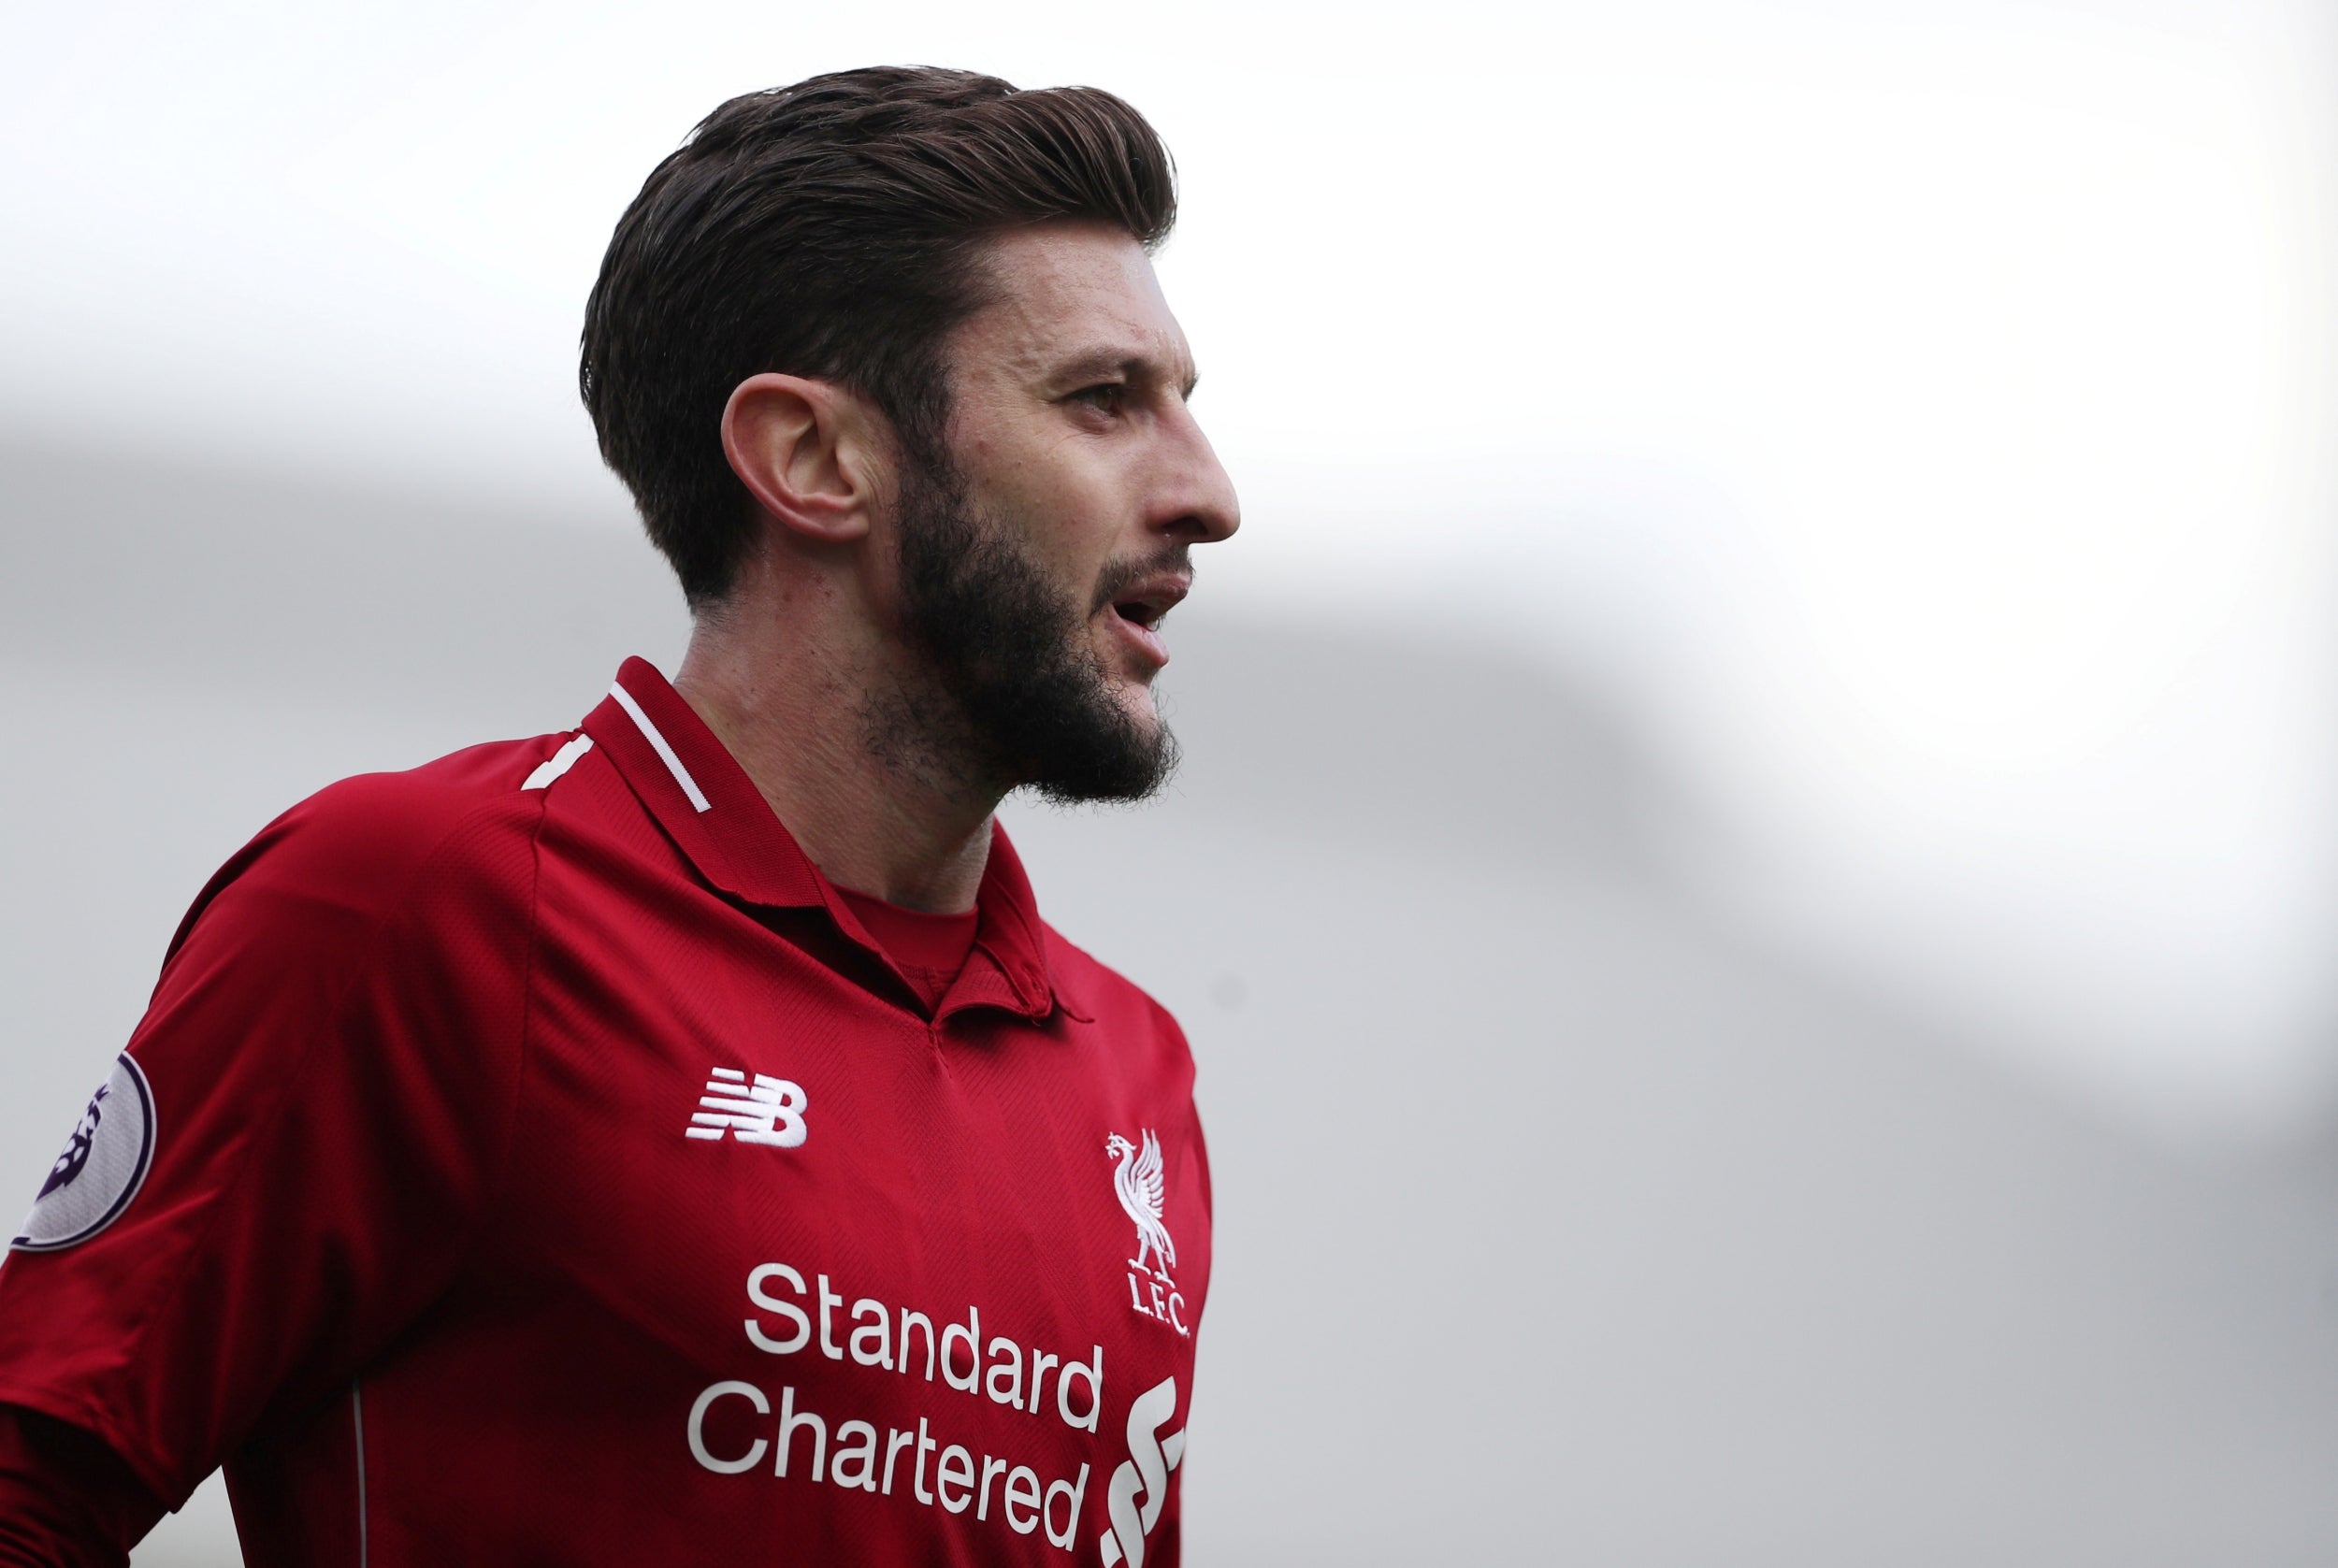 Lallana has one-year remaining on his current deal with the club (Reuters)